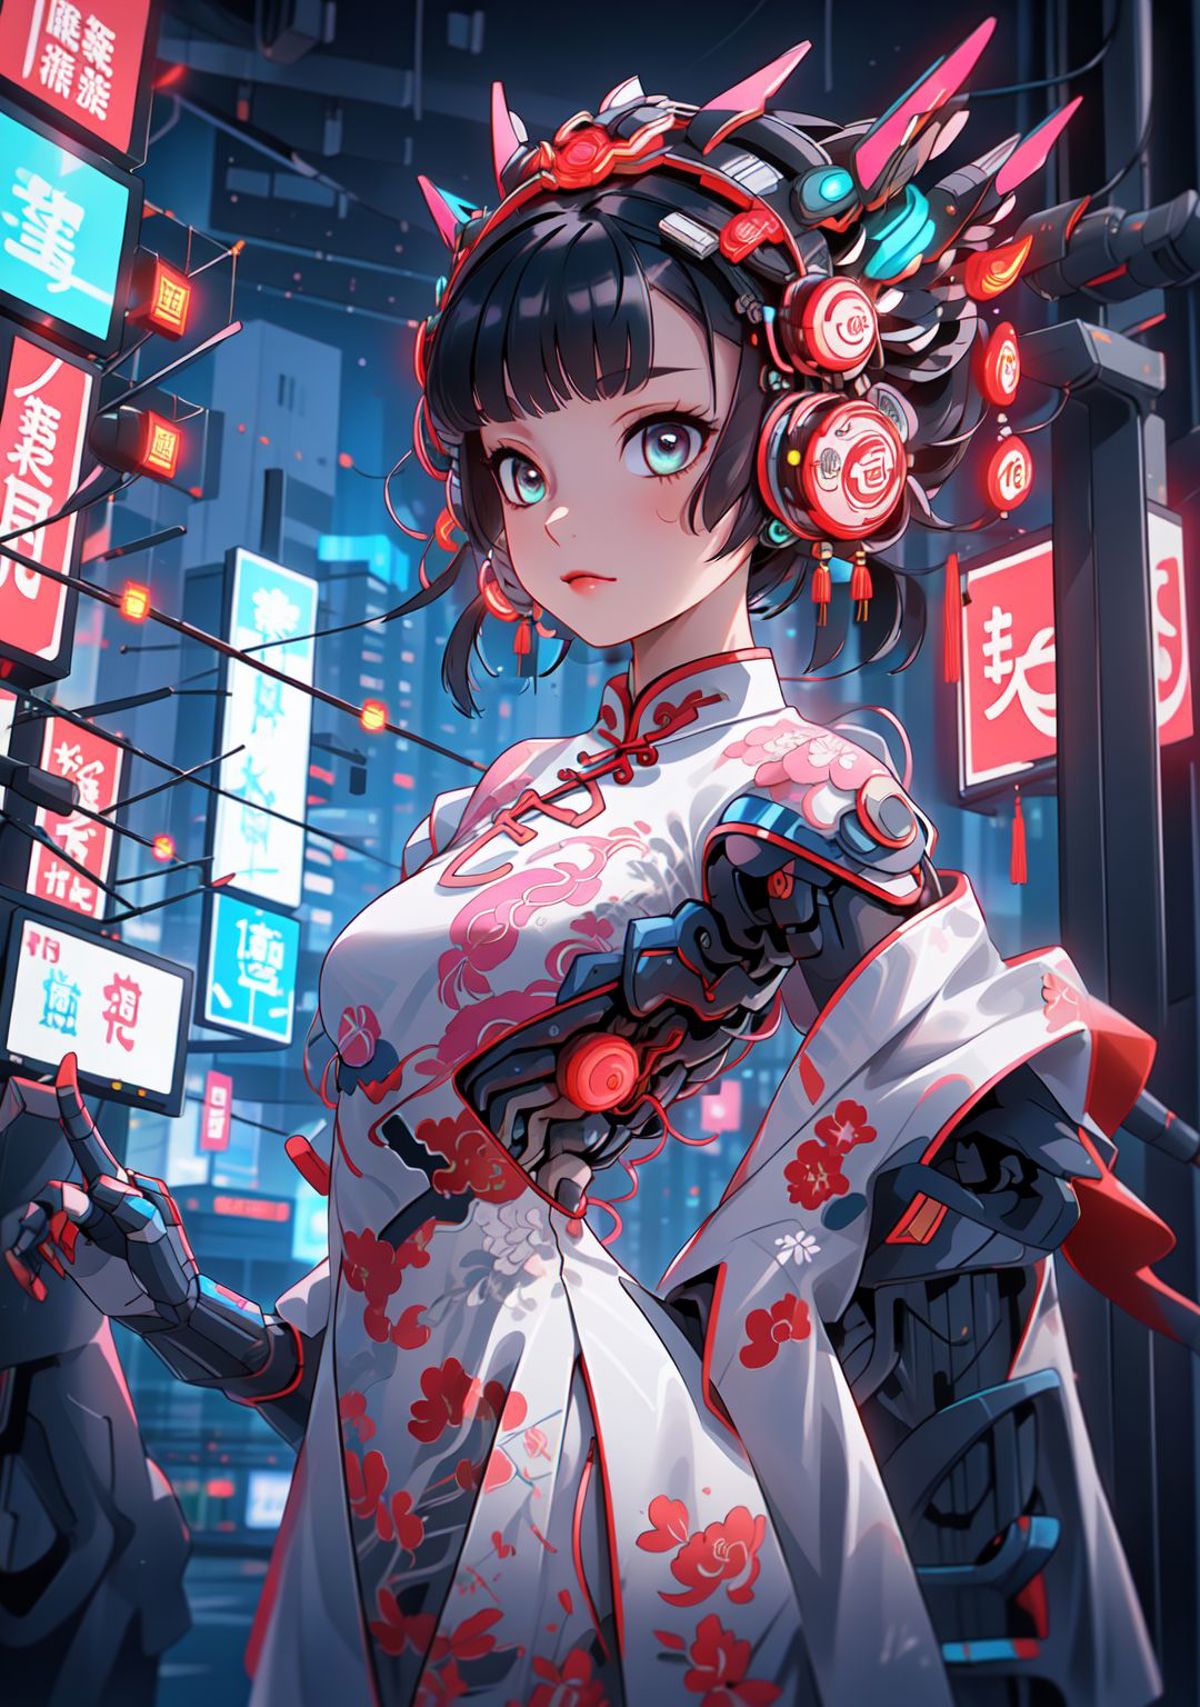 Cyberhanfu 赛博国风/Cyber Chinese style image by marusame